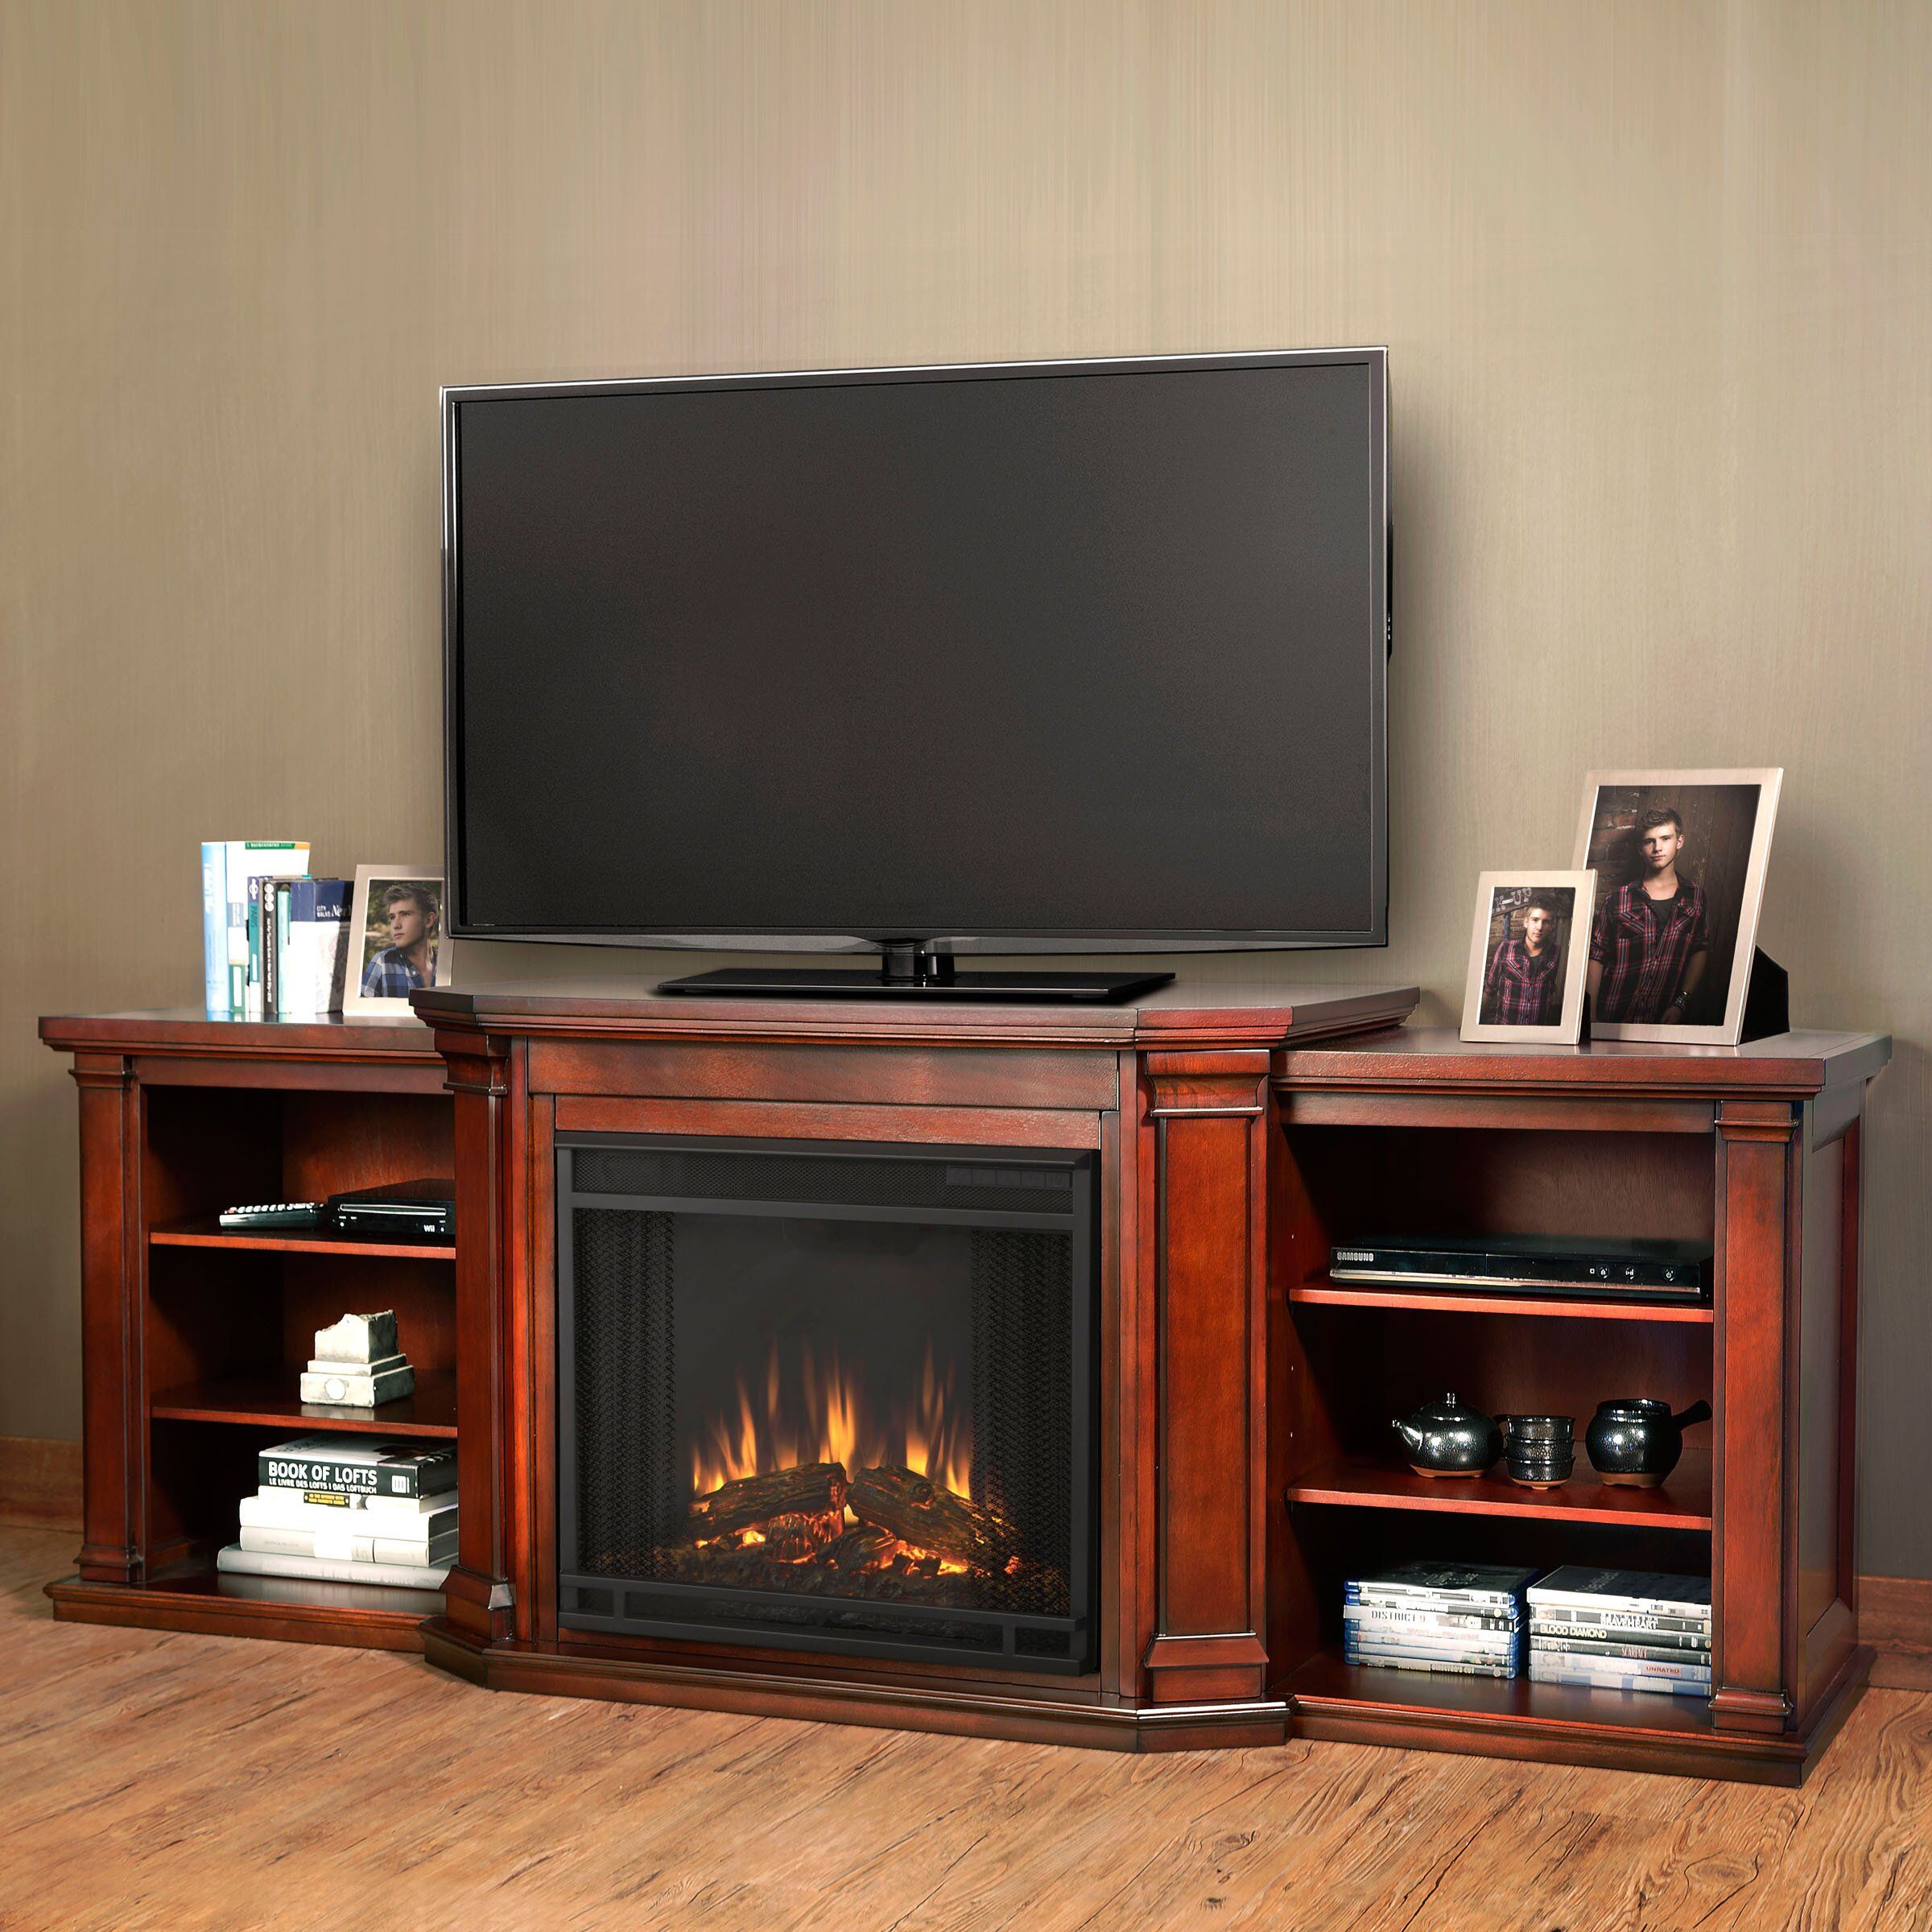 Real Flame Valmont Tv Stand With Electric Fireplace In Big Lots Tv Stands (View 2 of 15)